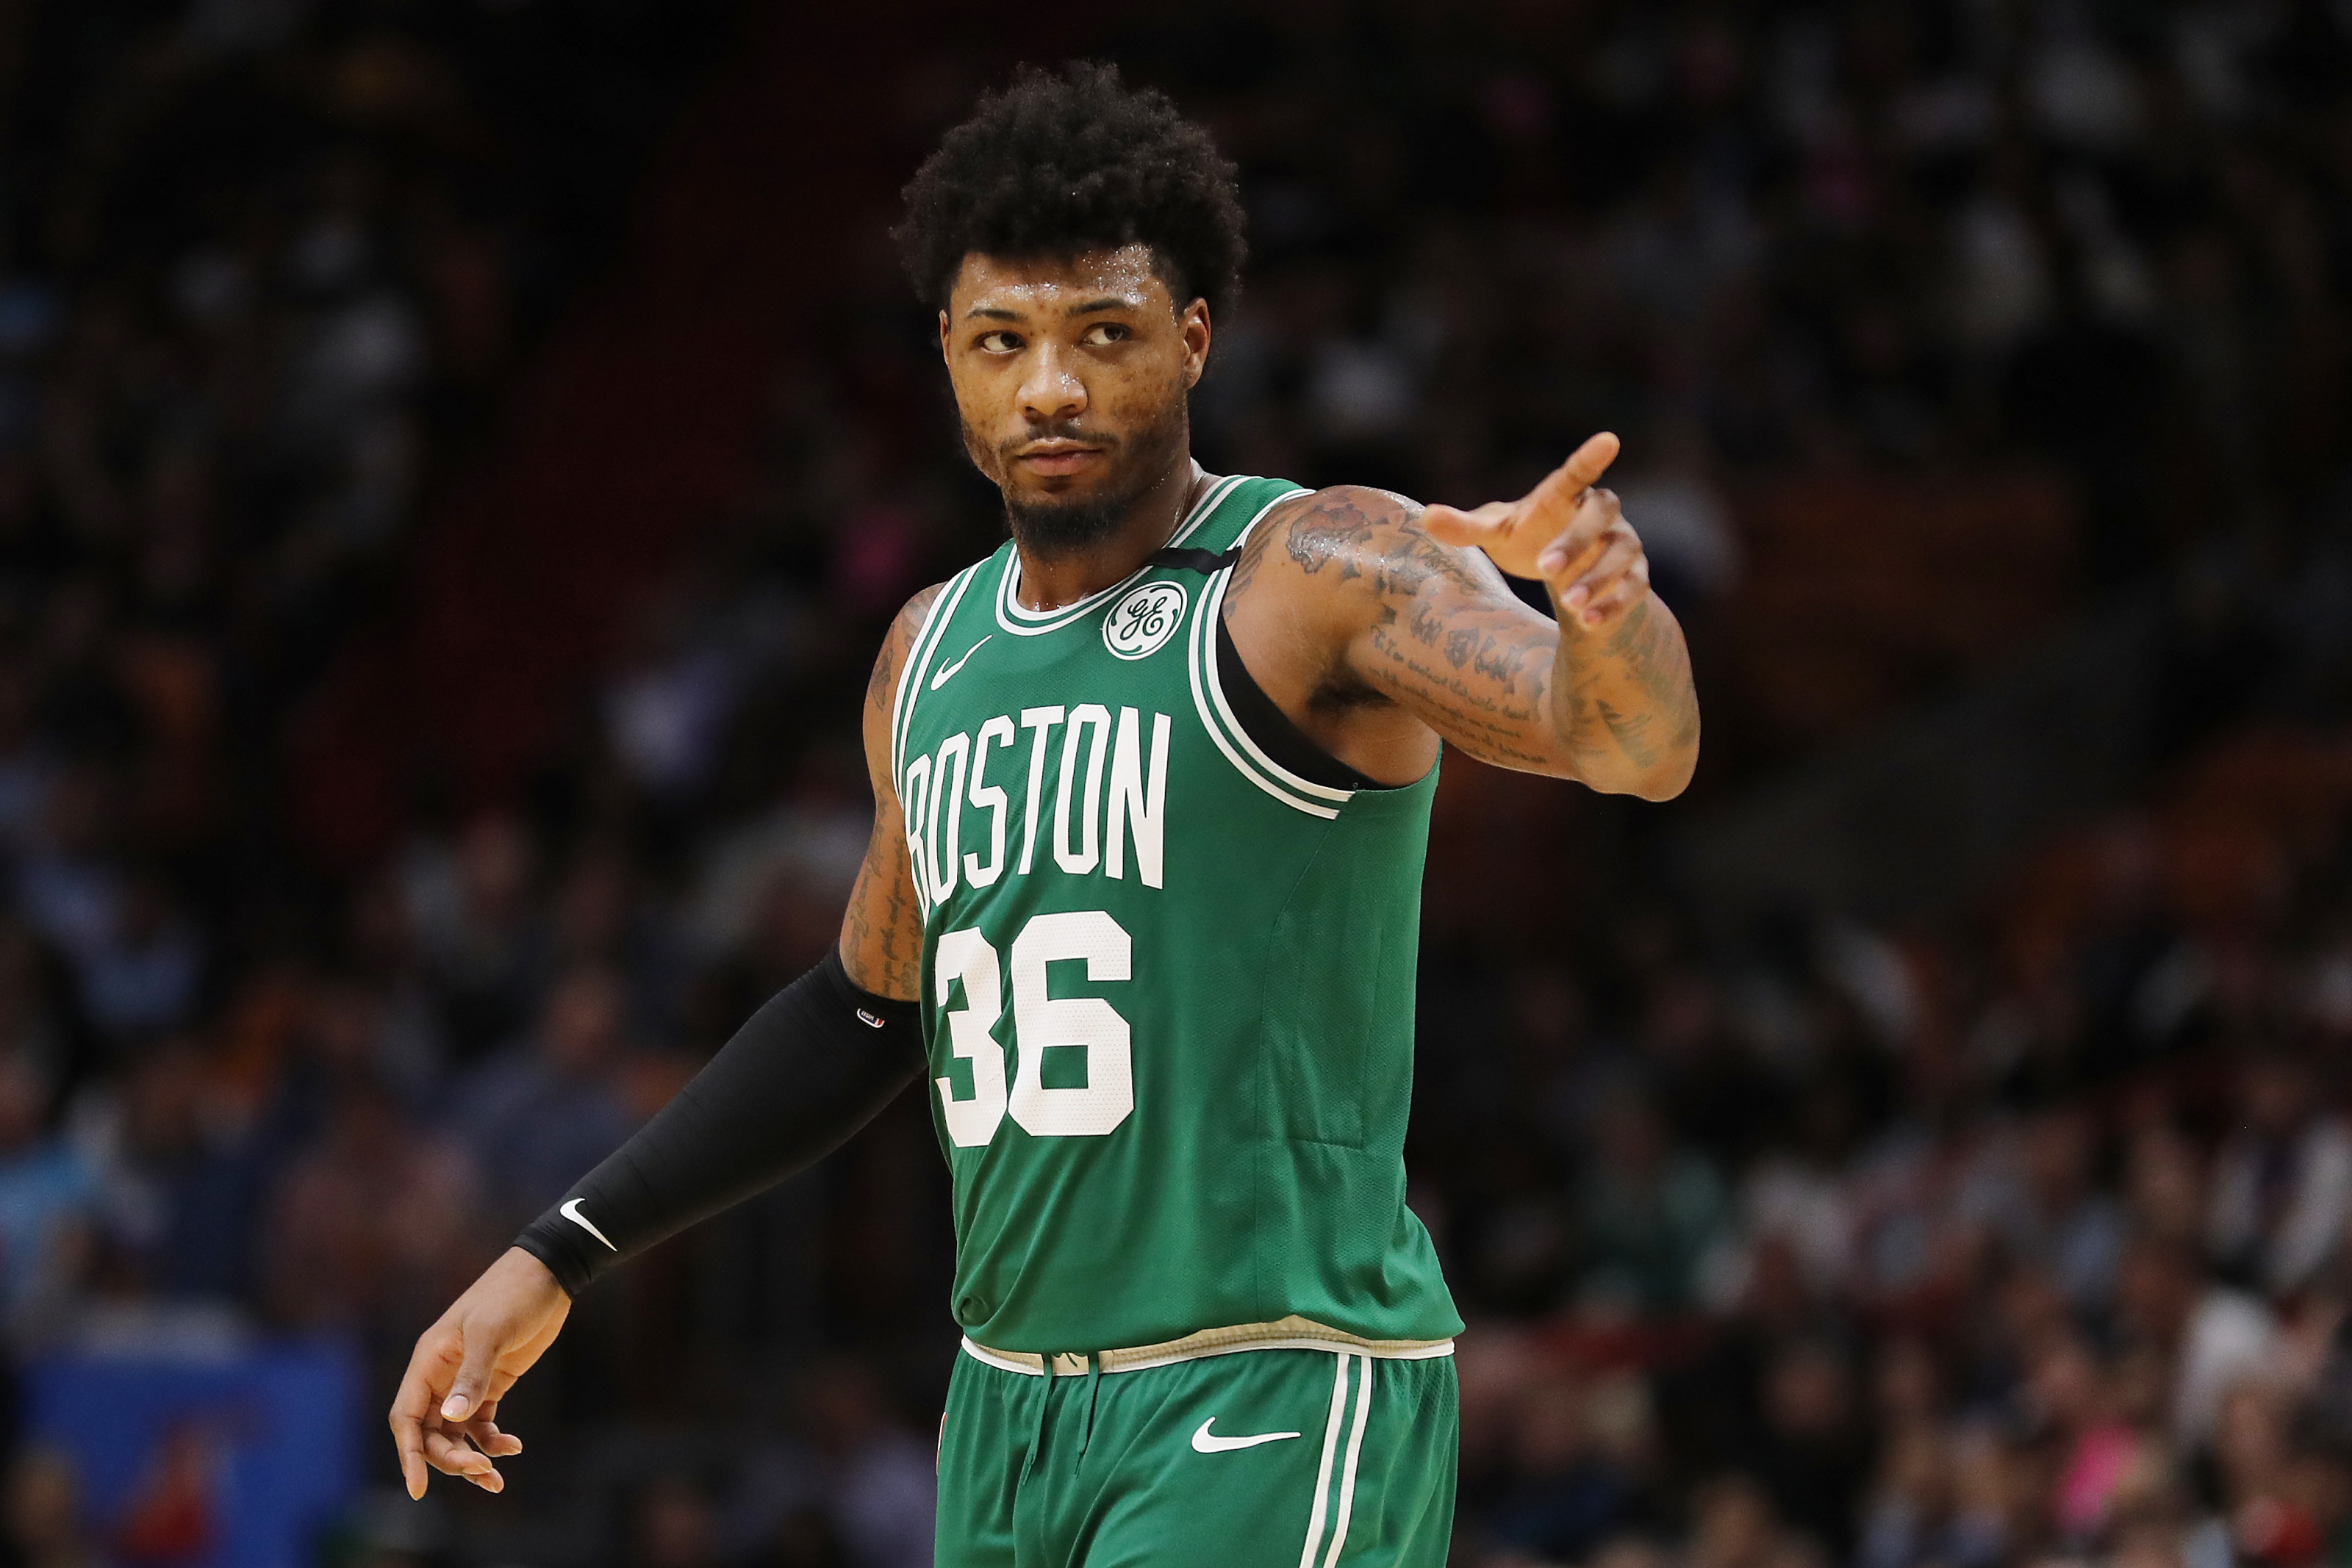 All about Celtics star Marcus Smart with stats and contract info